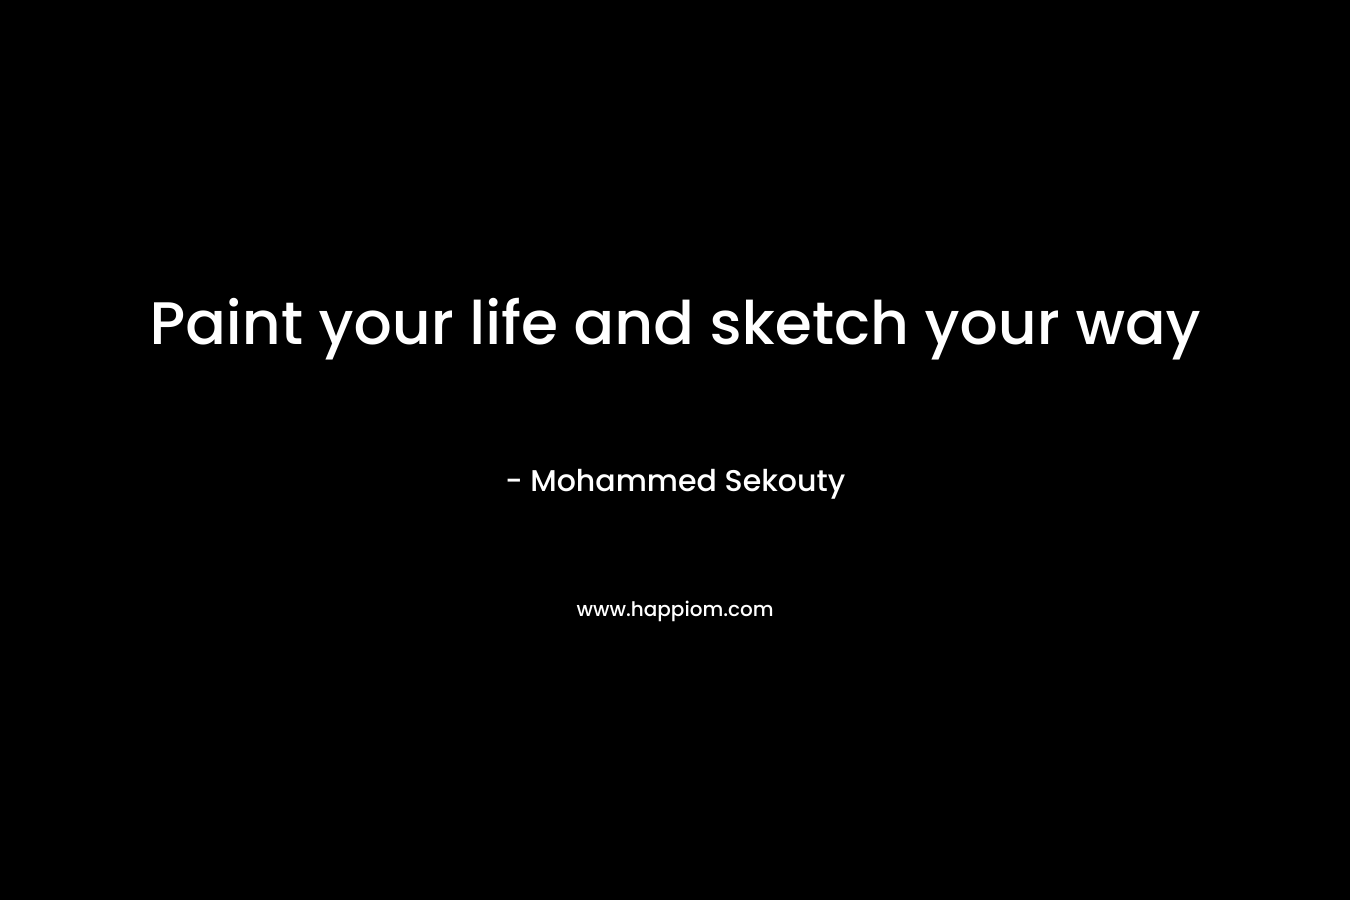 Paint your life and sketch your way – Mohammed Sekouty